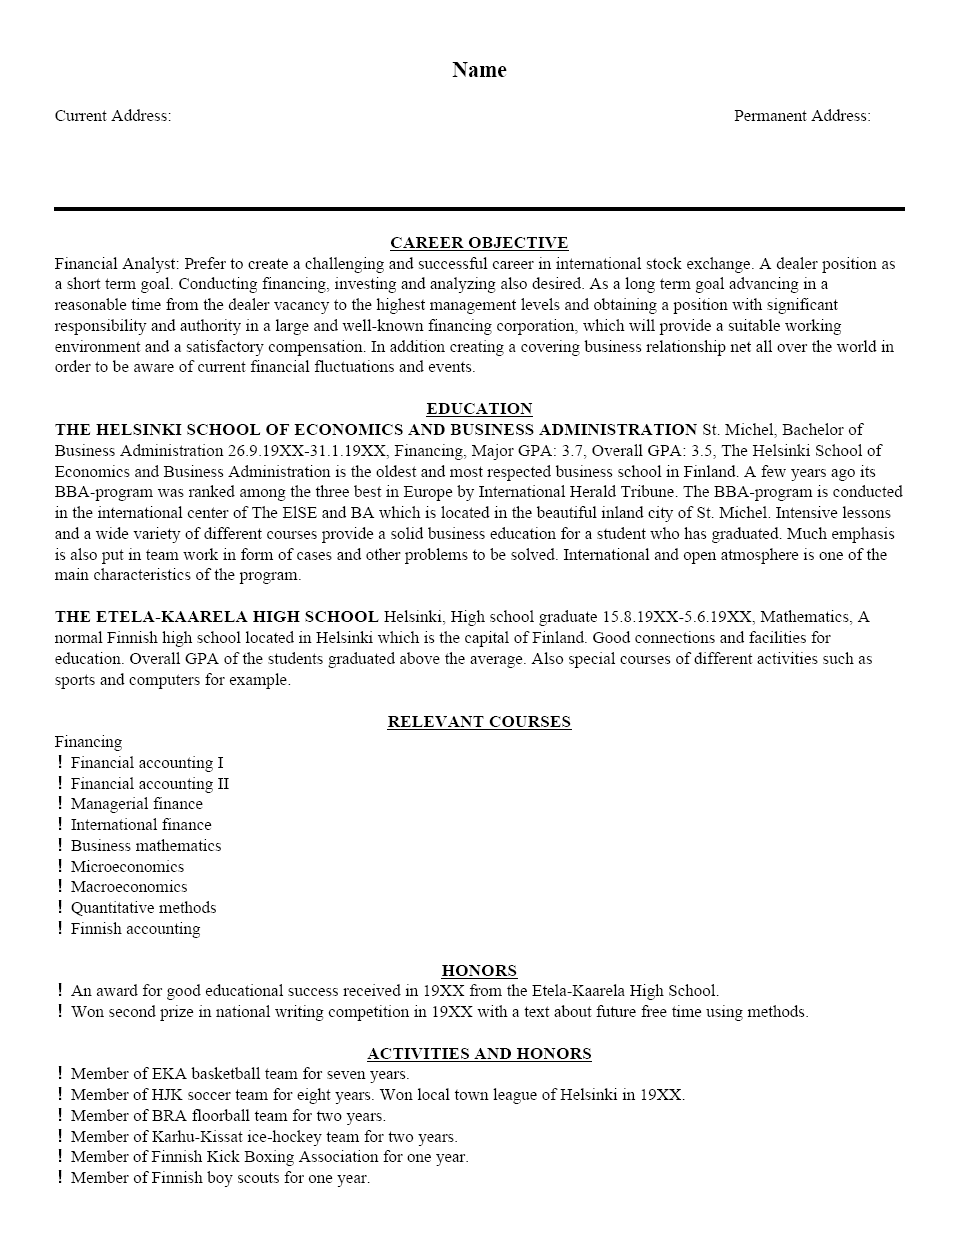 Resume Templates And Examples 